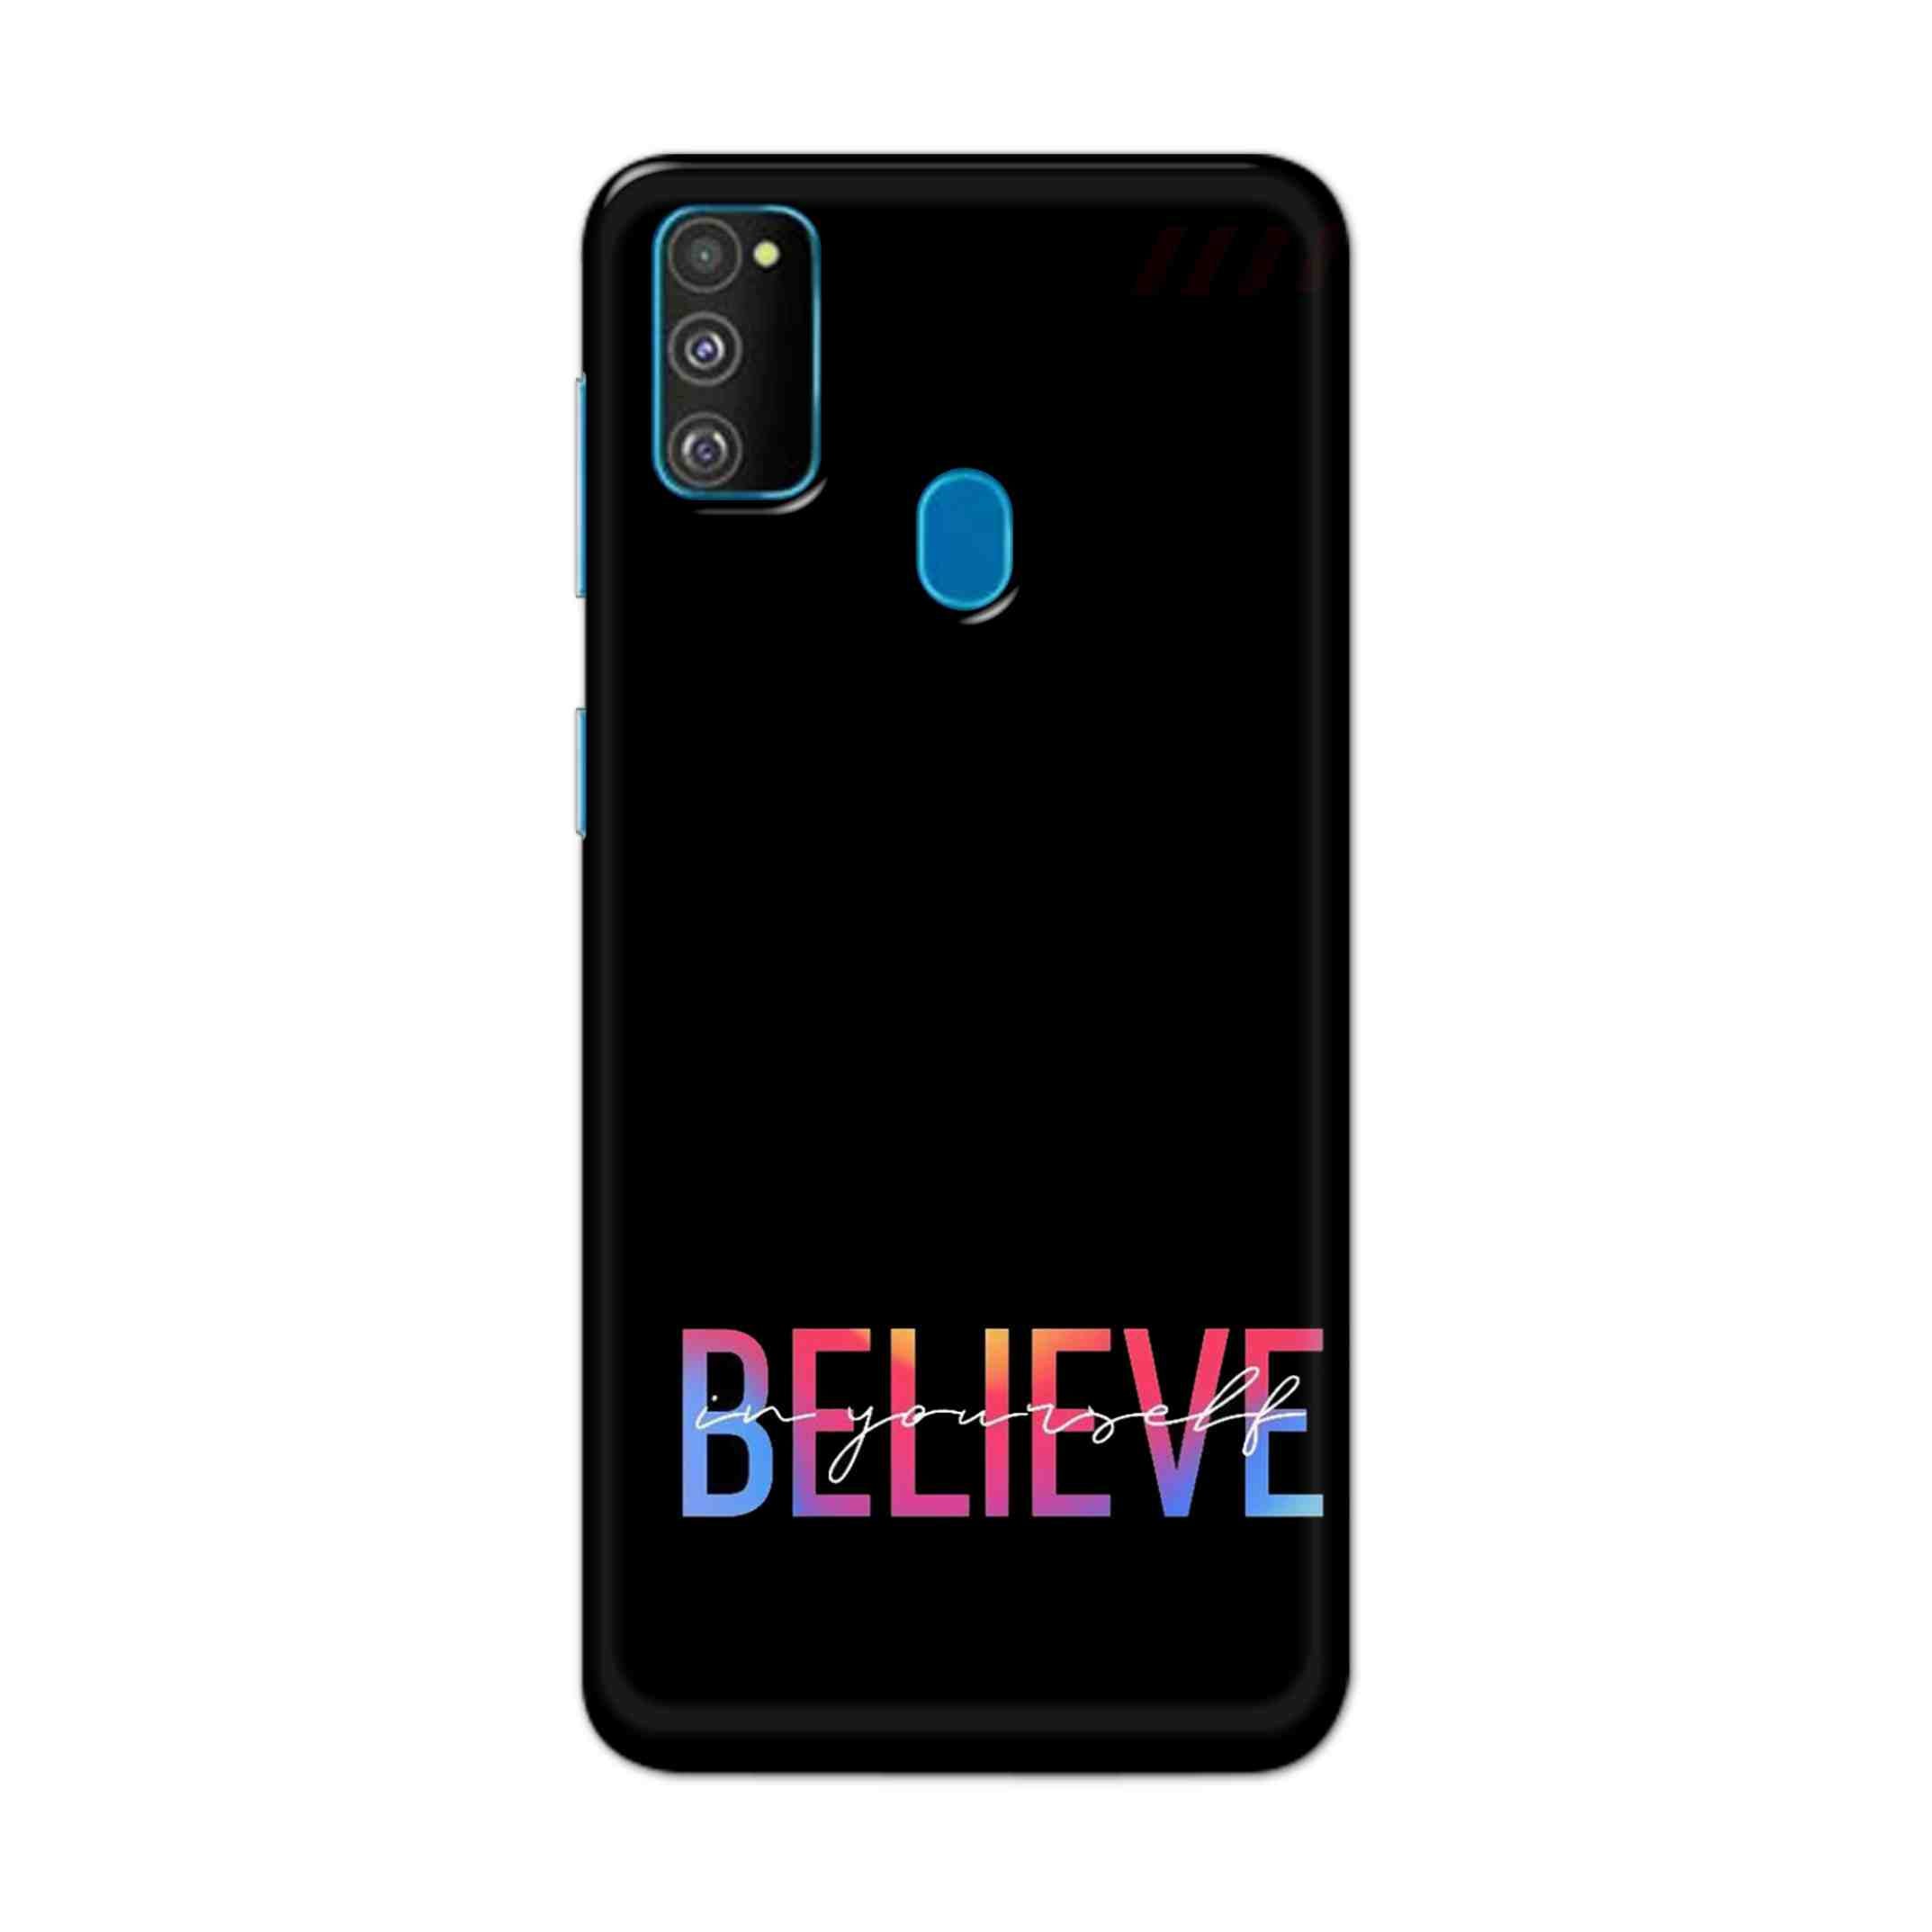 Buy Believe Hard Back Mobile Phone Case Cover For Samsung Galaxy M30s Online